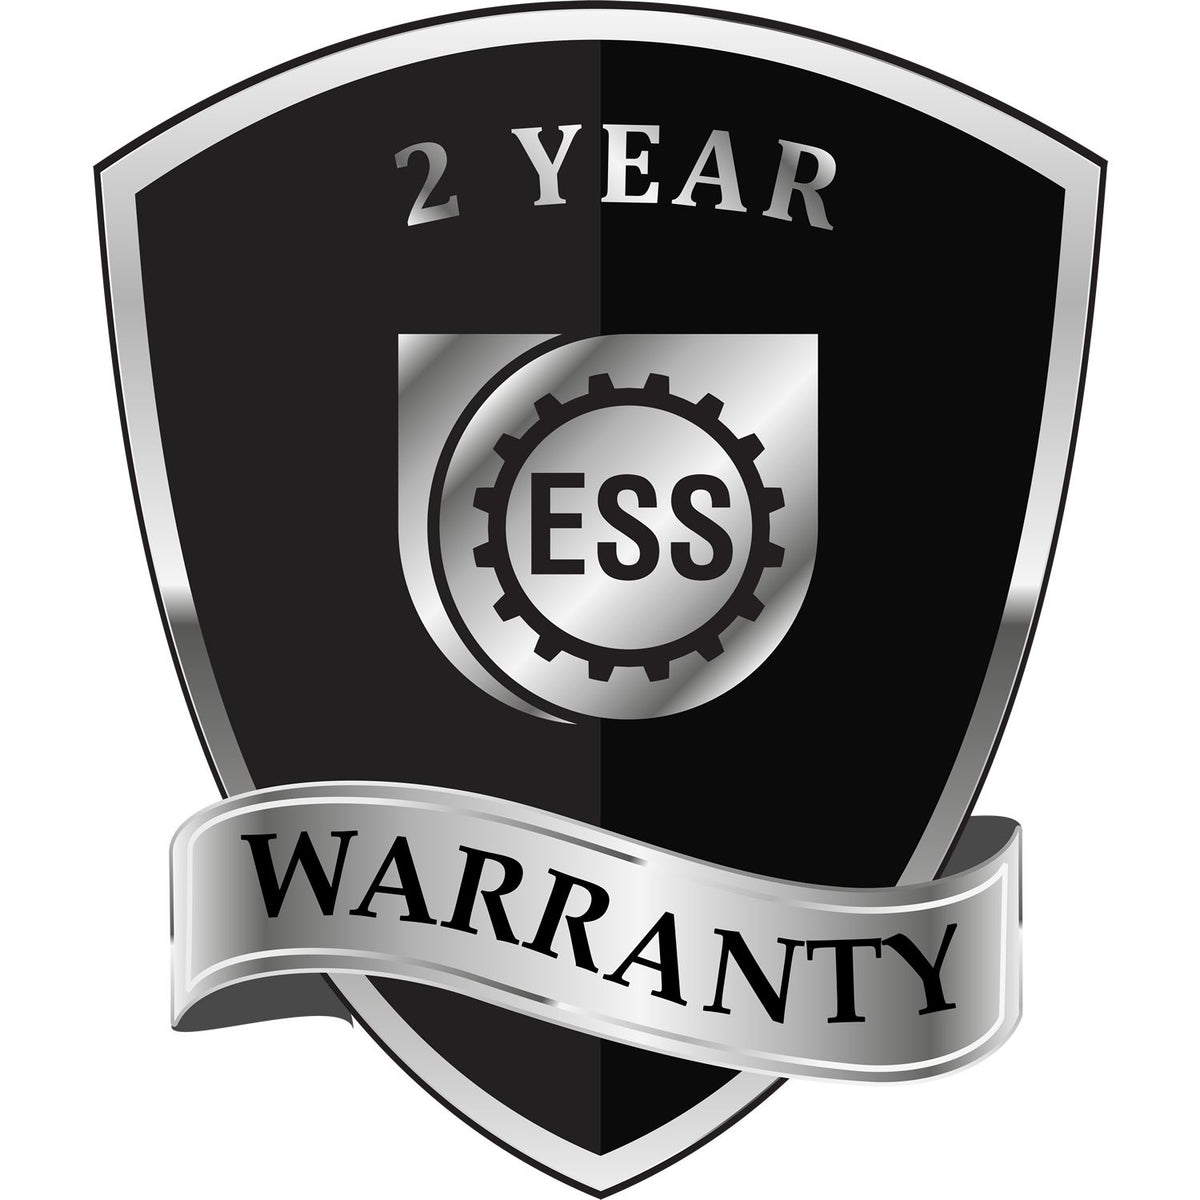 A black and silver badge or emblem showing warranty information for the Soft Virginia Professional Geologist Seal